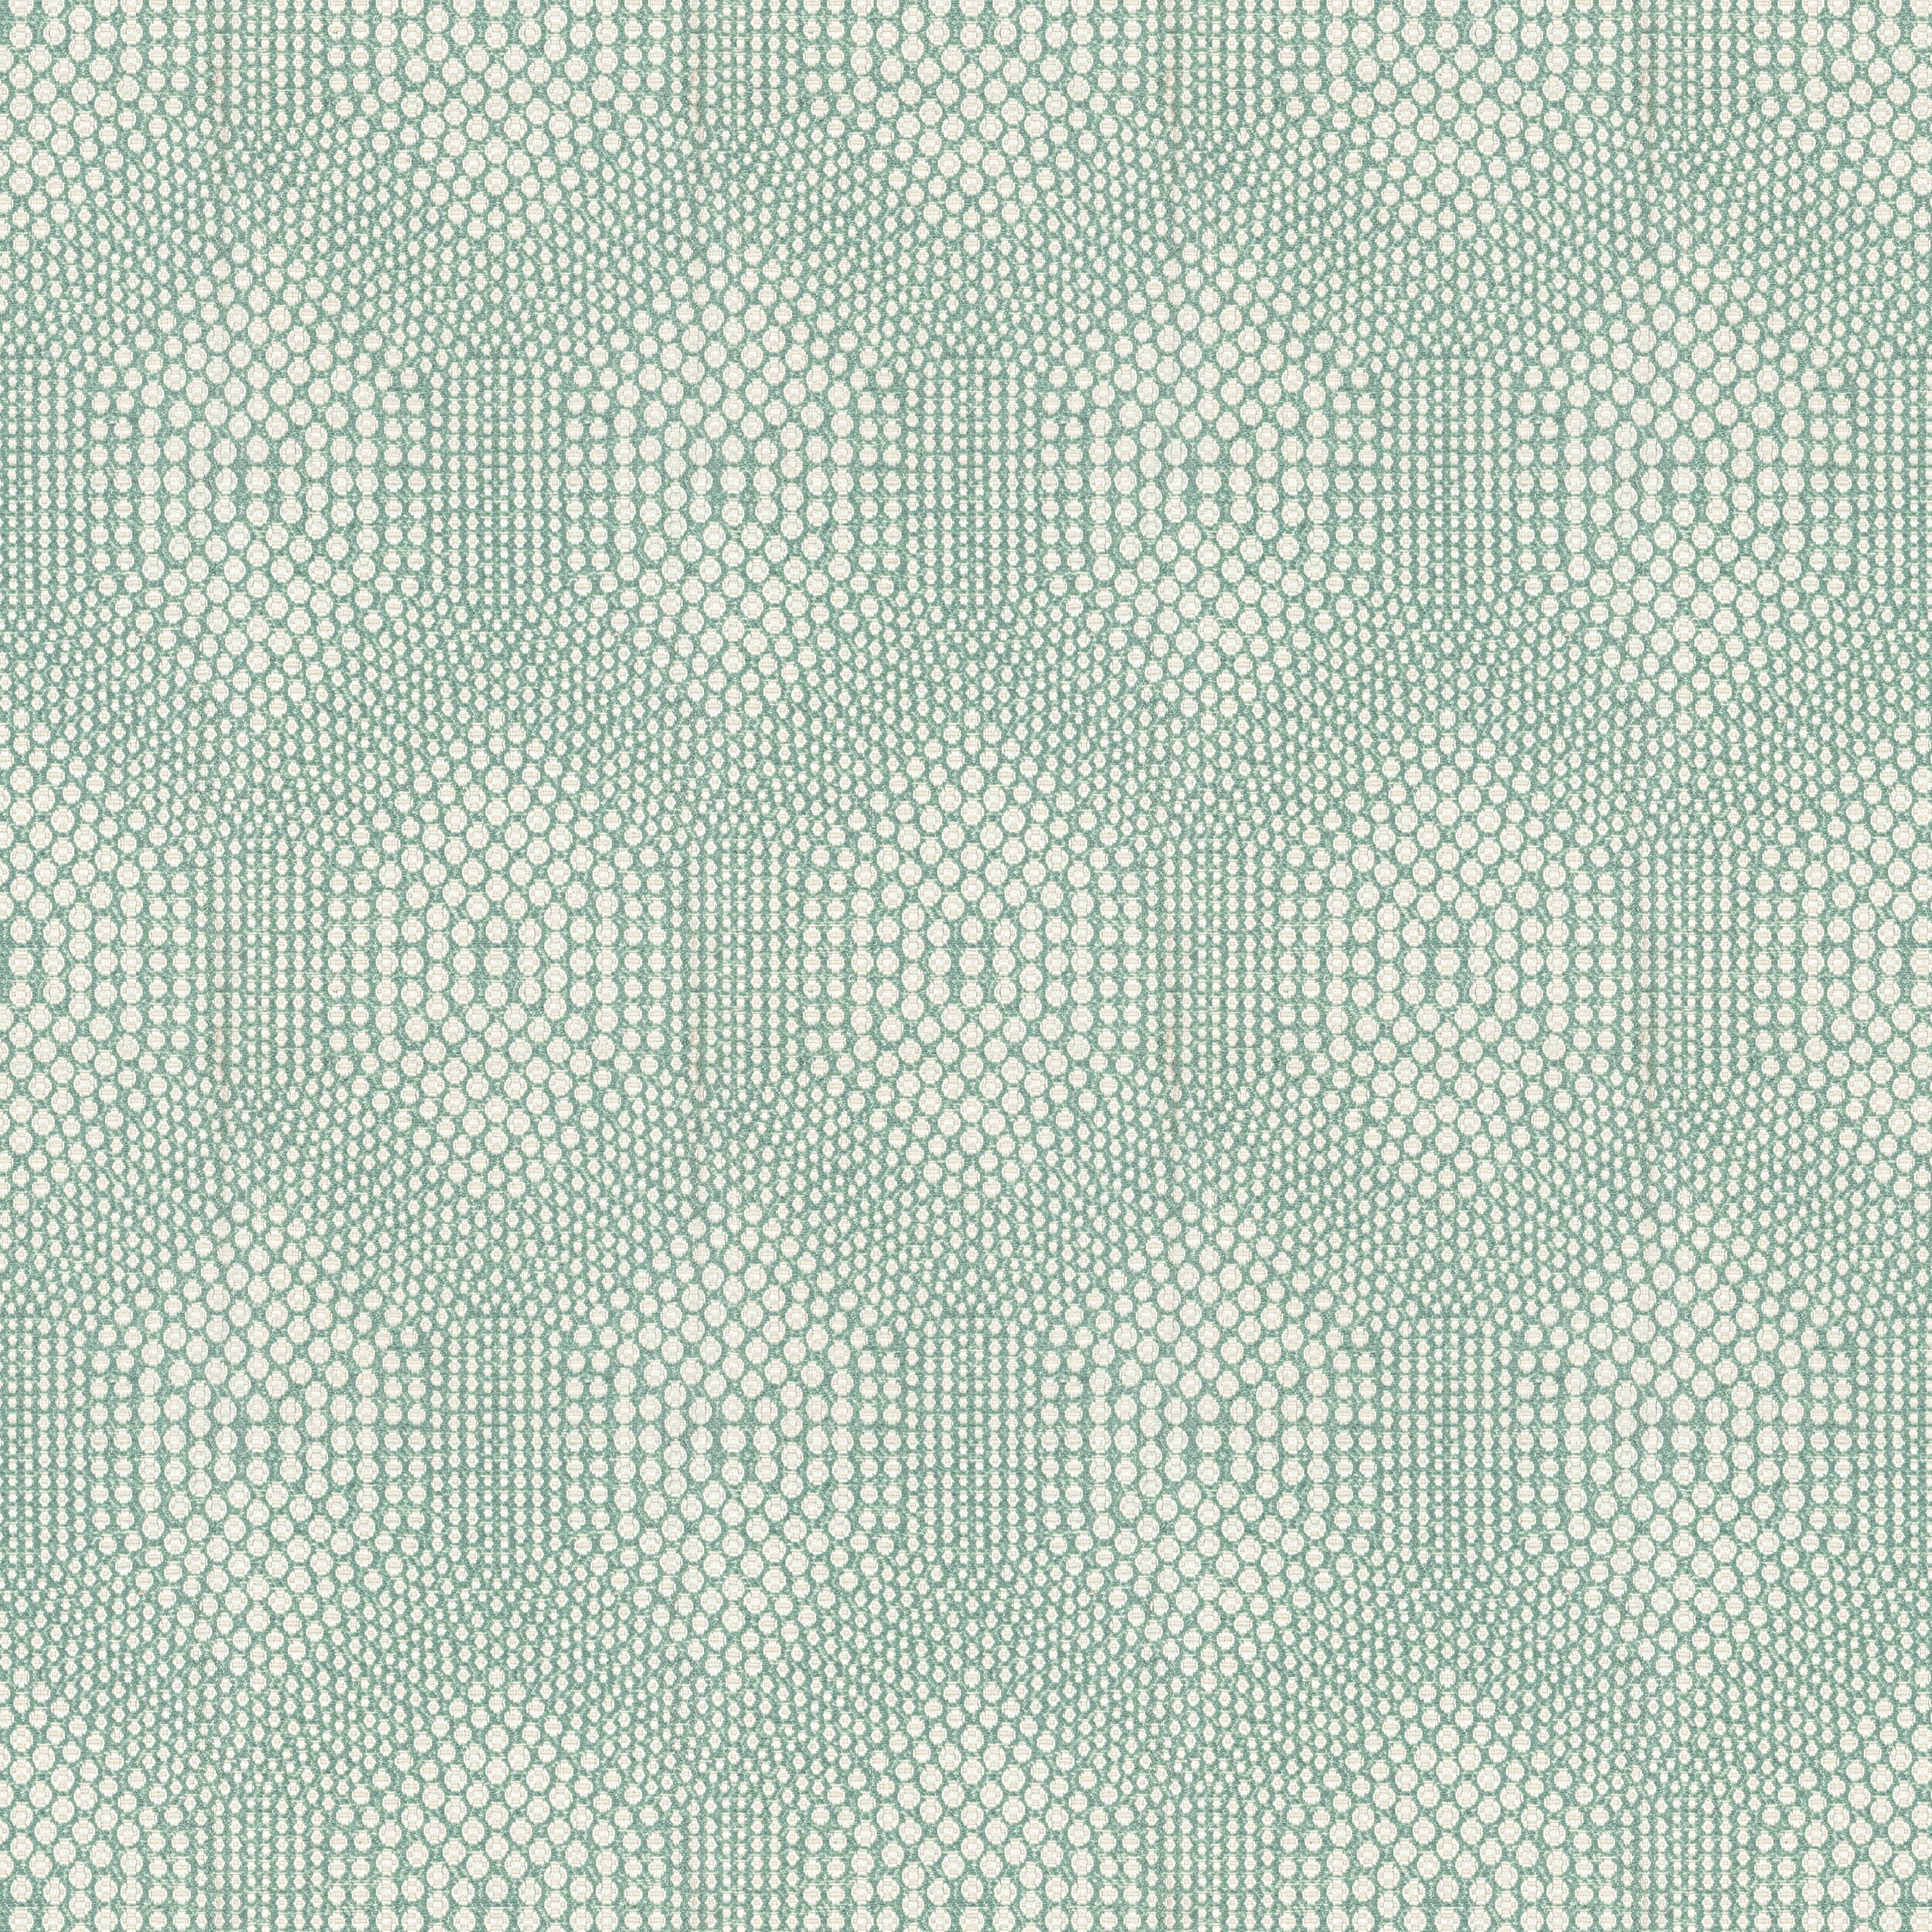 7802-49 Connect The Dots Seaspray by Stout Fabric